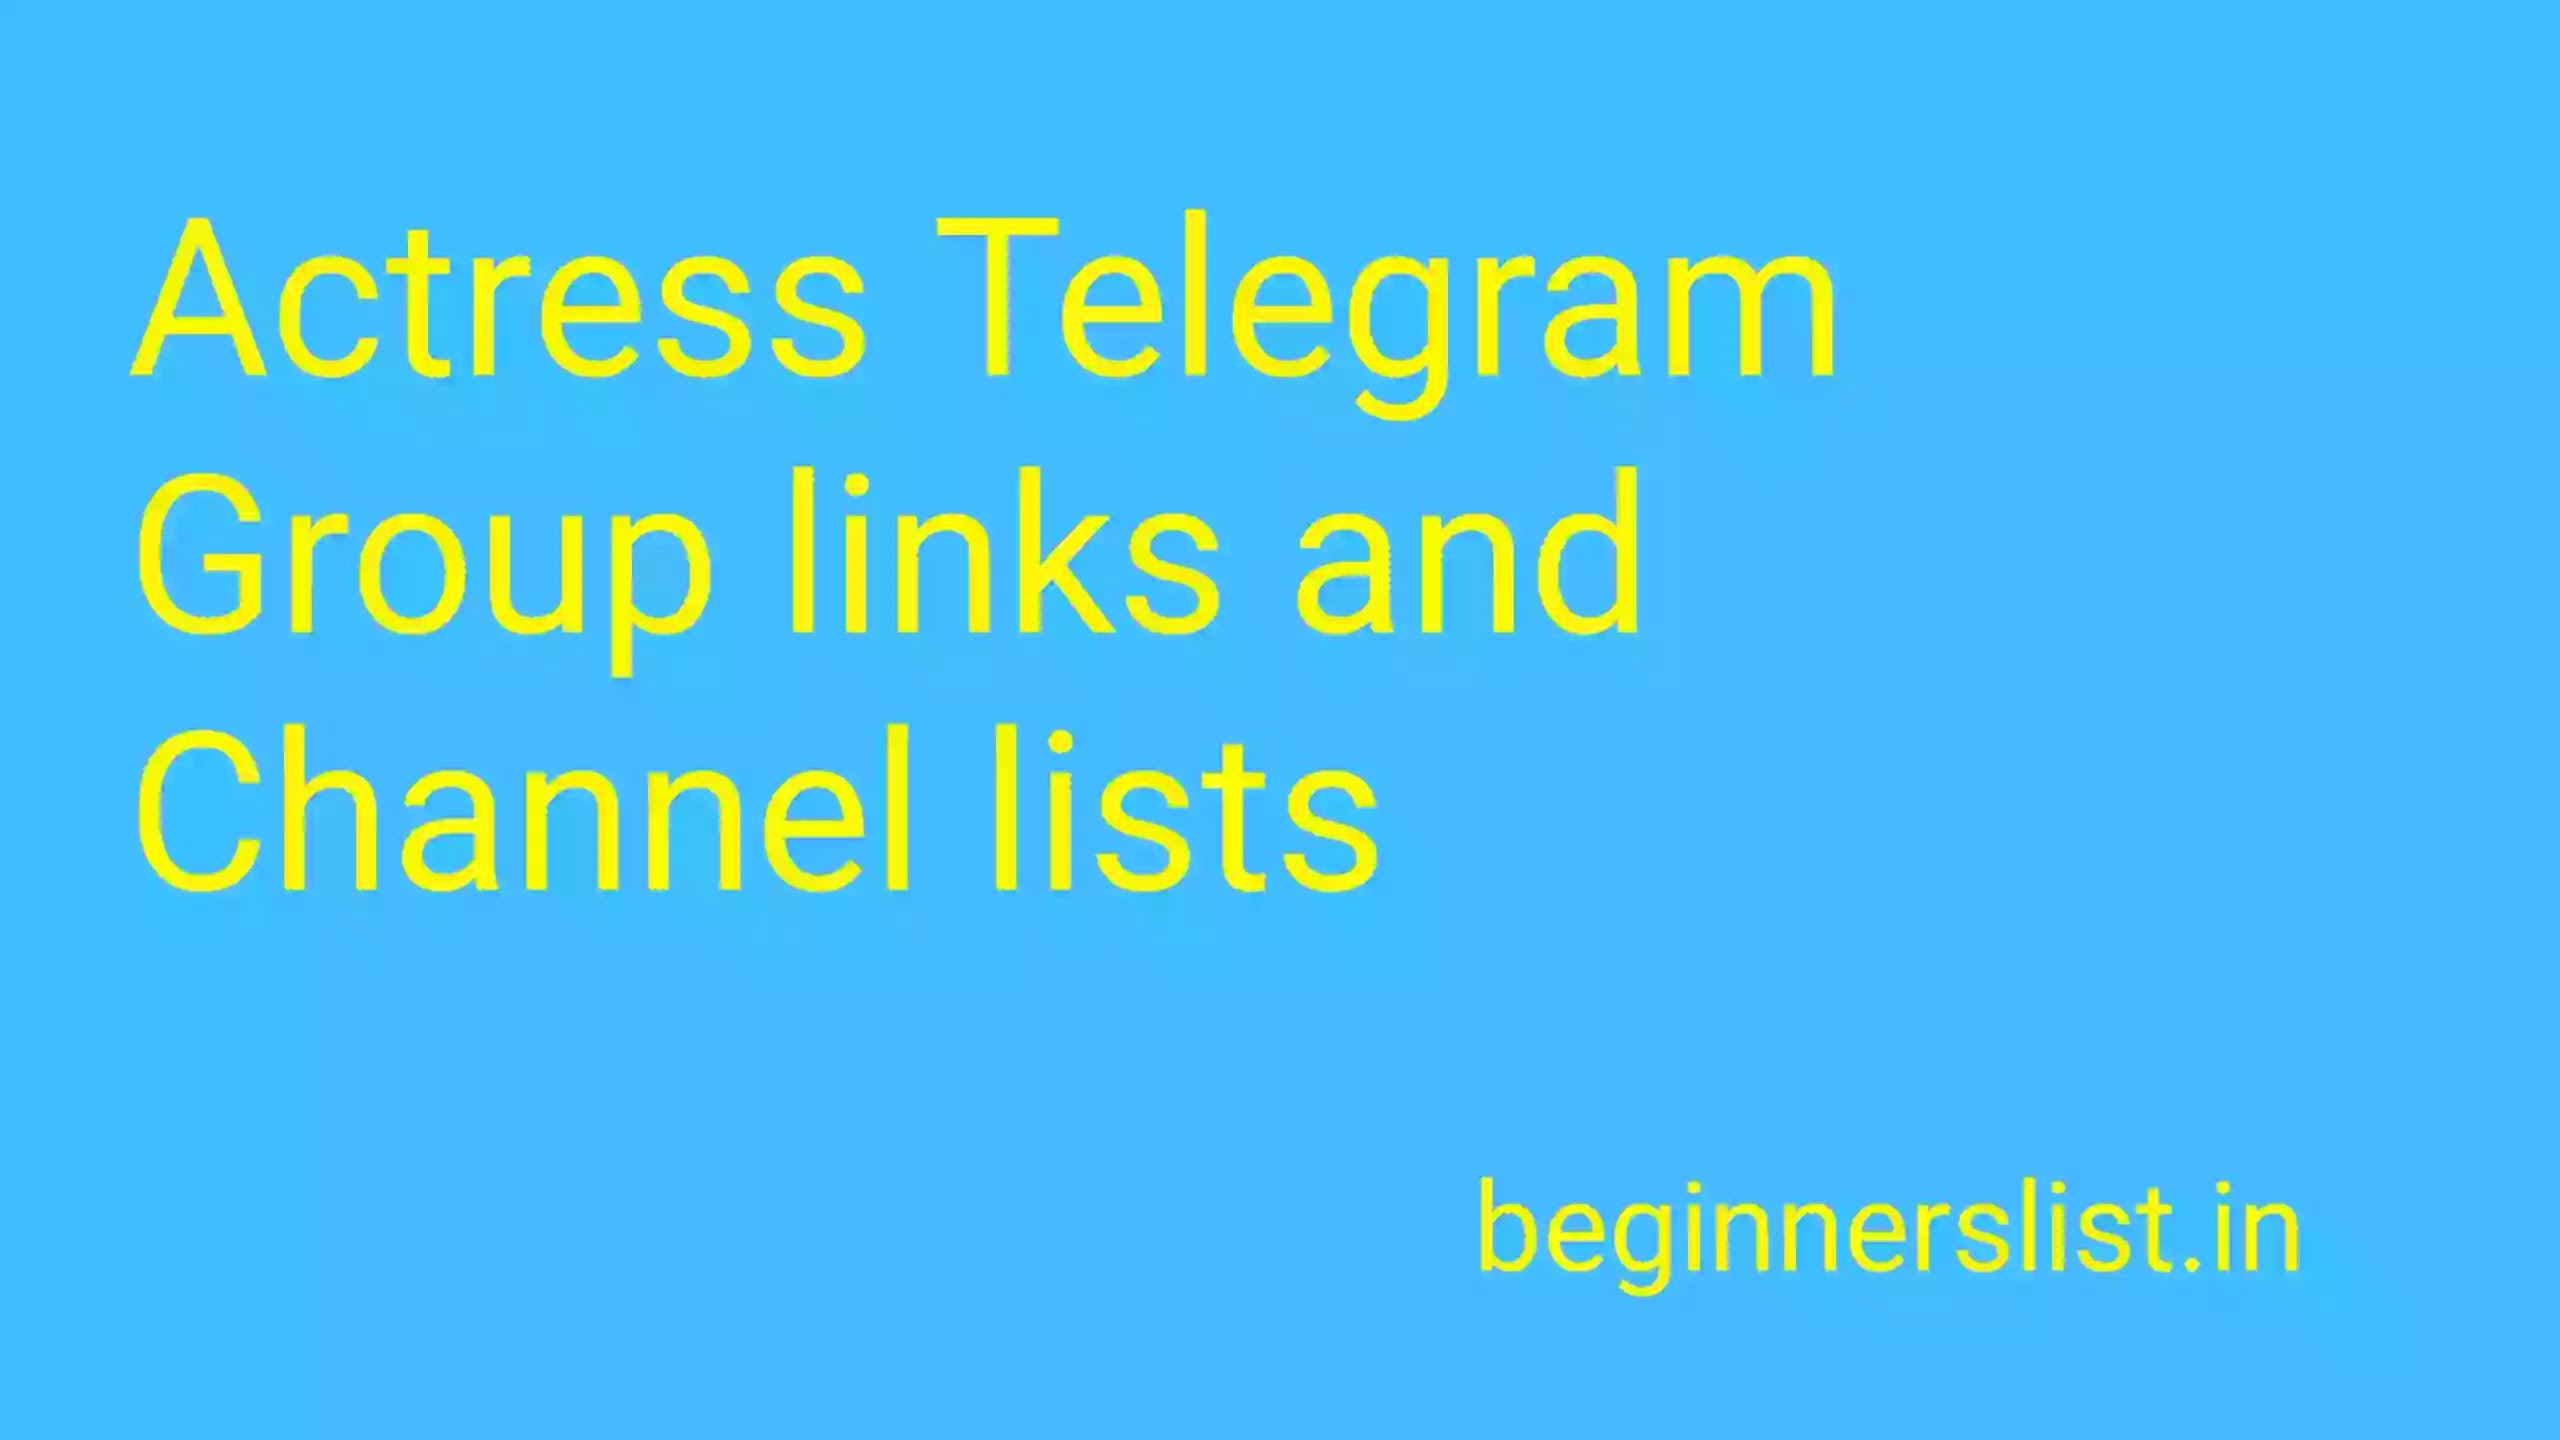 Best Actress Telegram Group links and Channel lists 2022